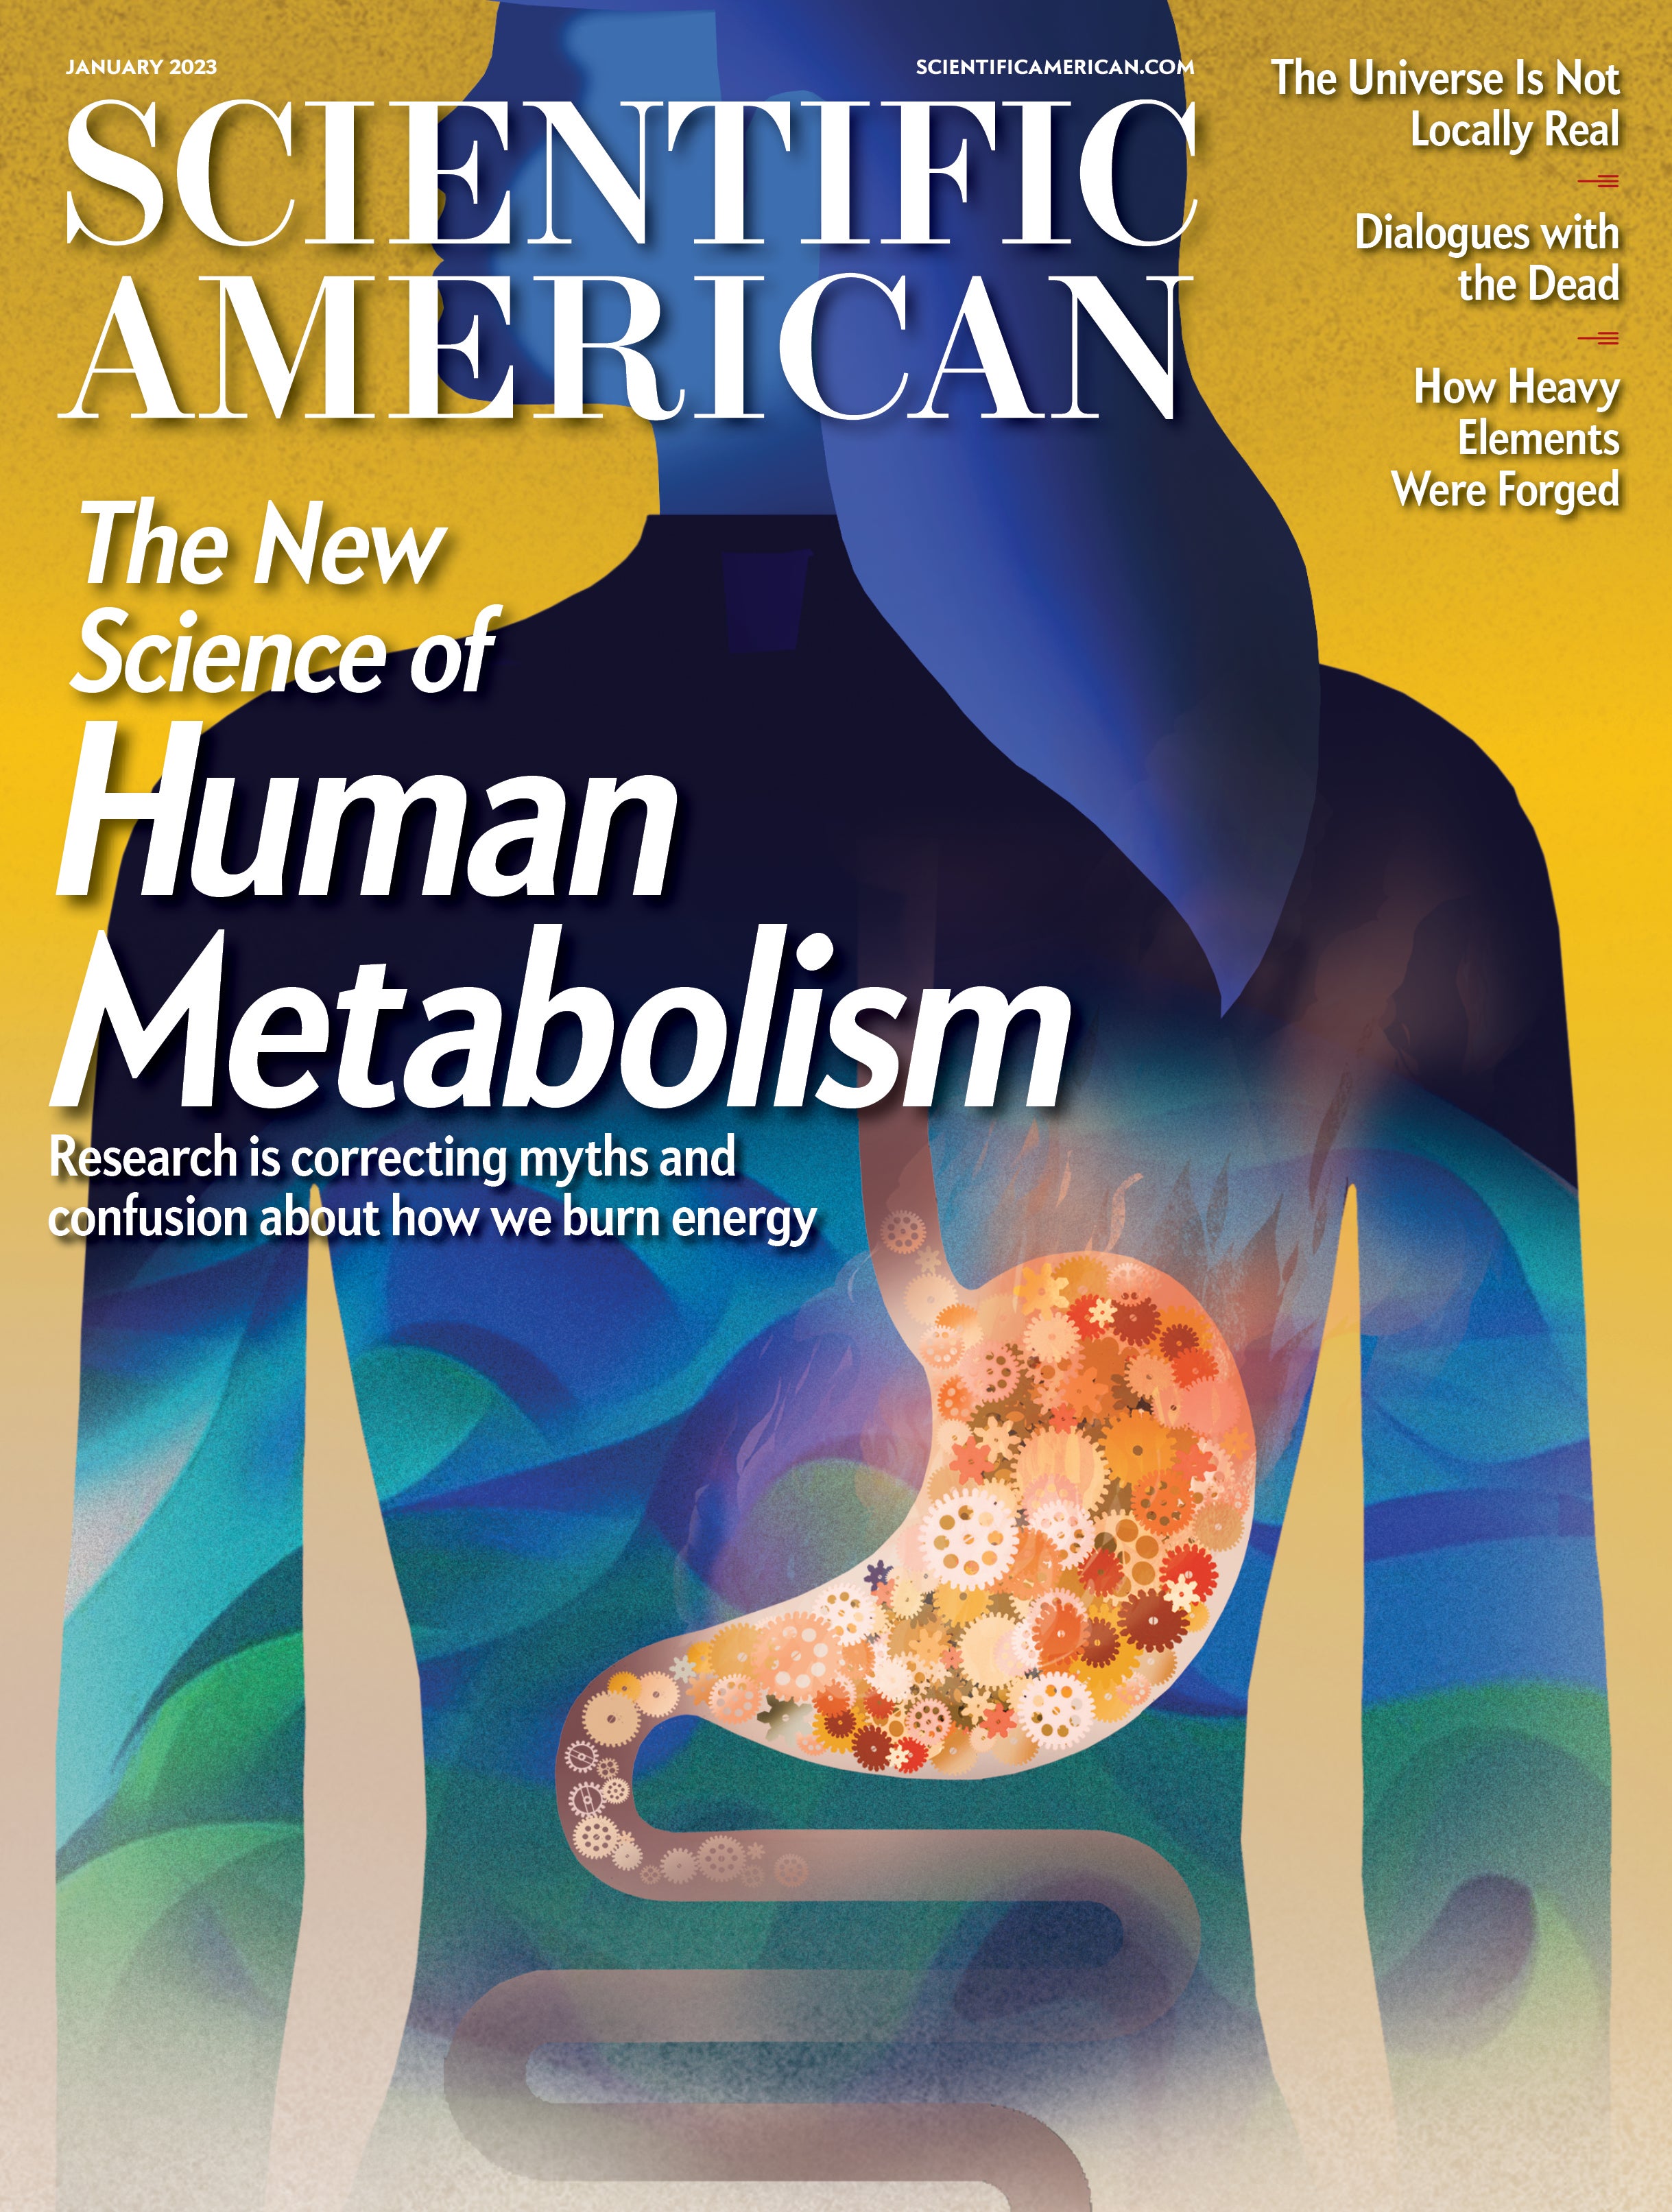 Scientific American: The New Science of Human Metabolism